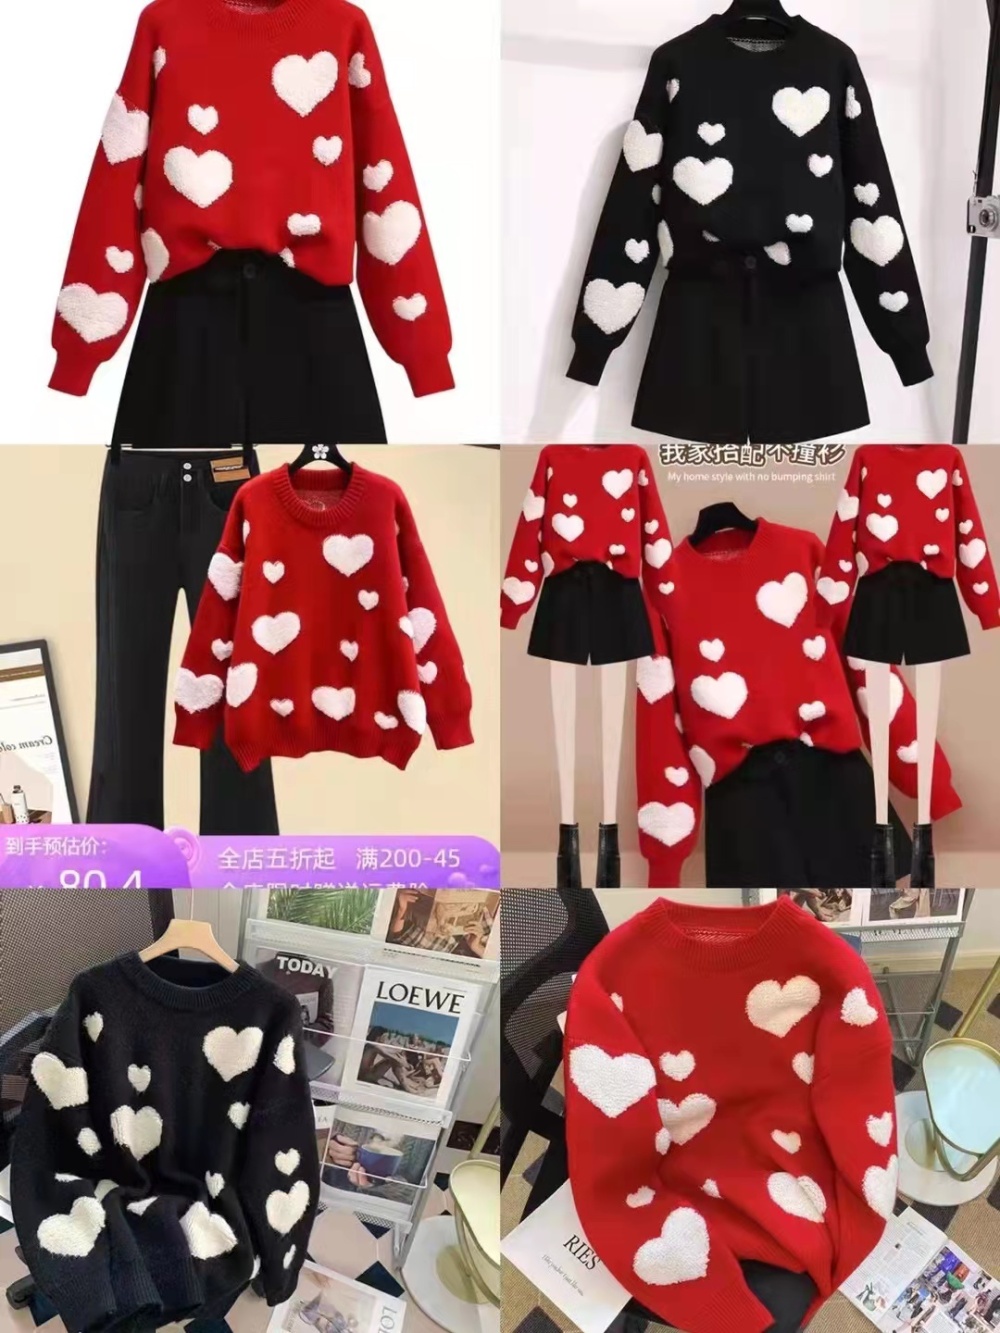 Heart autumn and winter sweater pullover tops for women